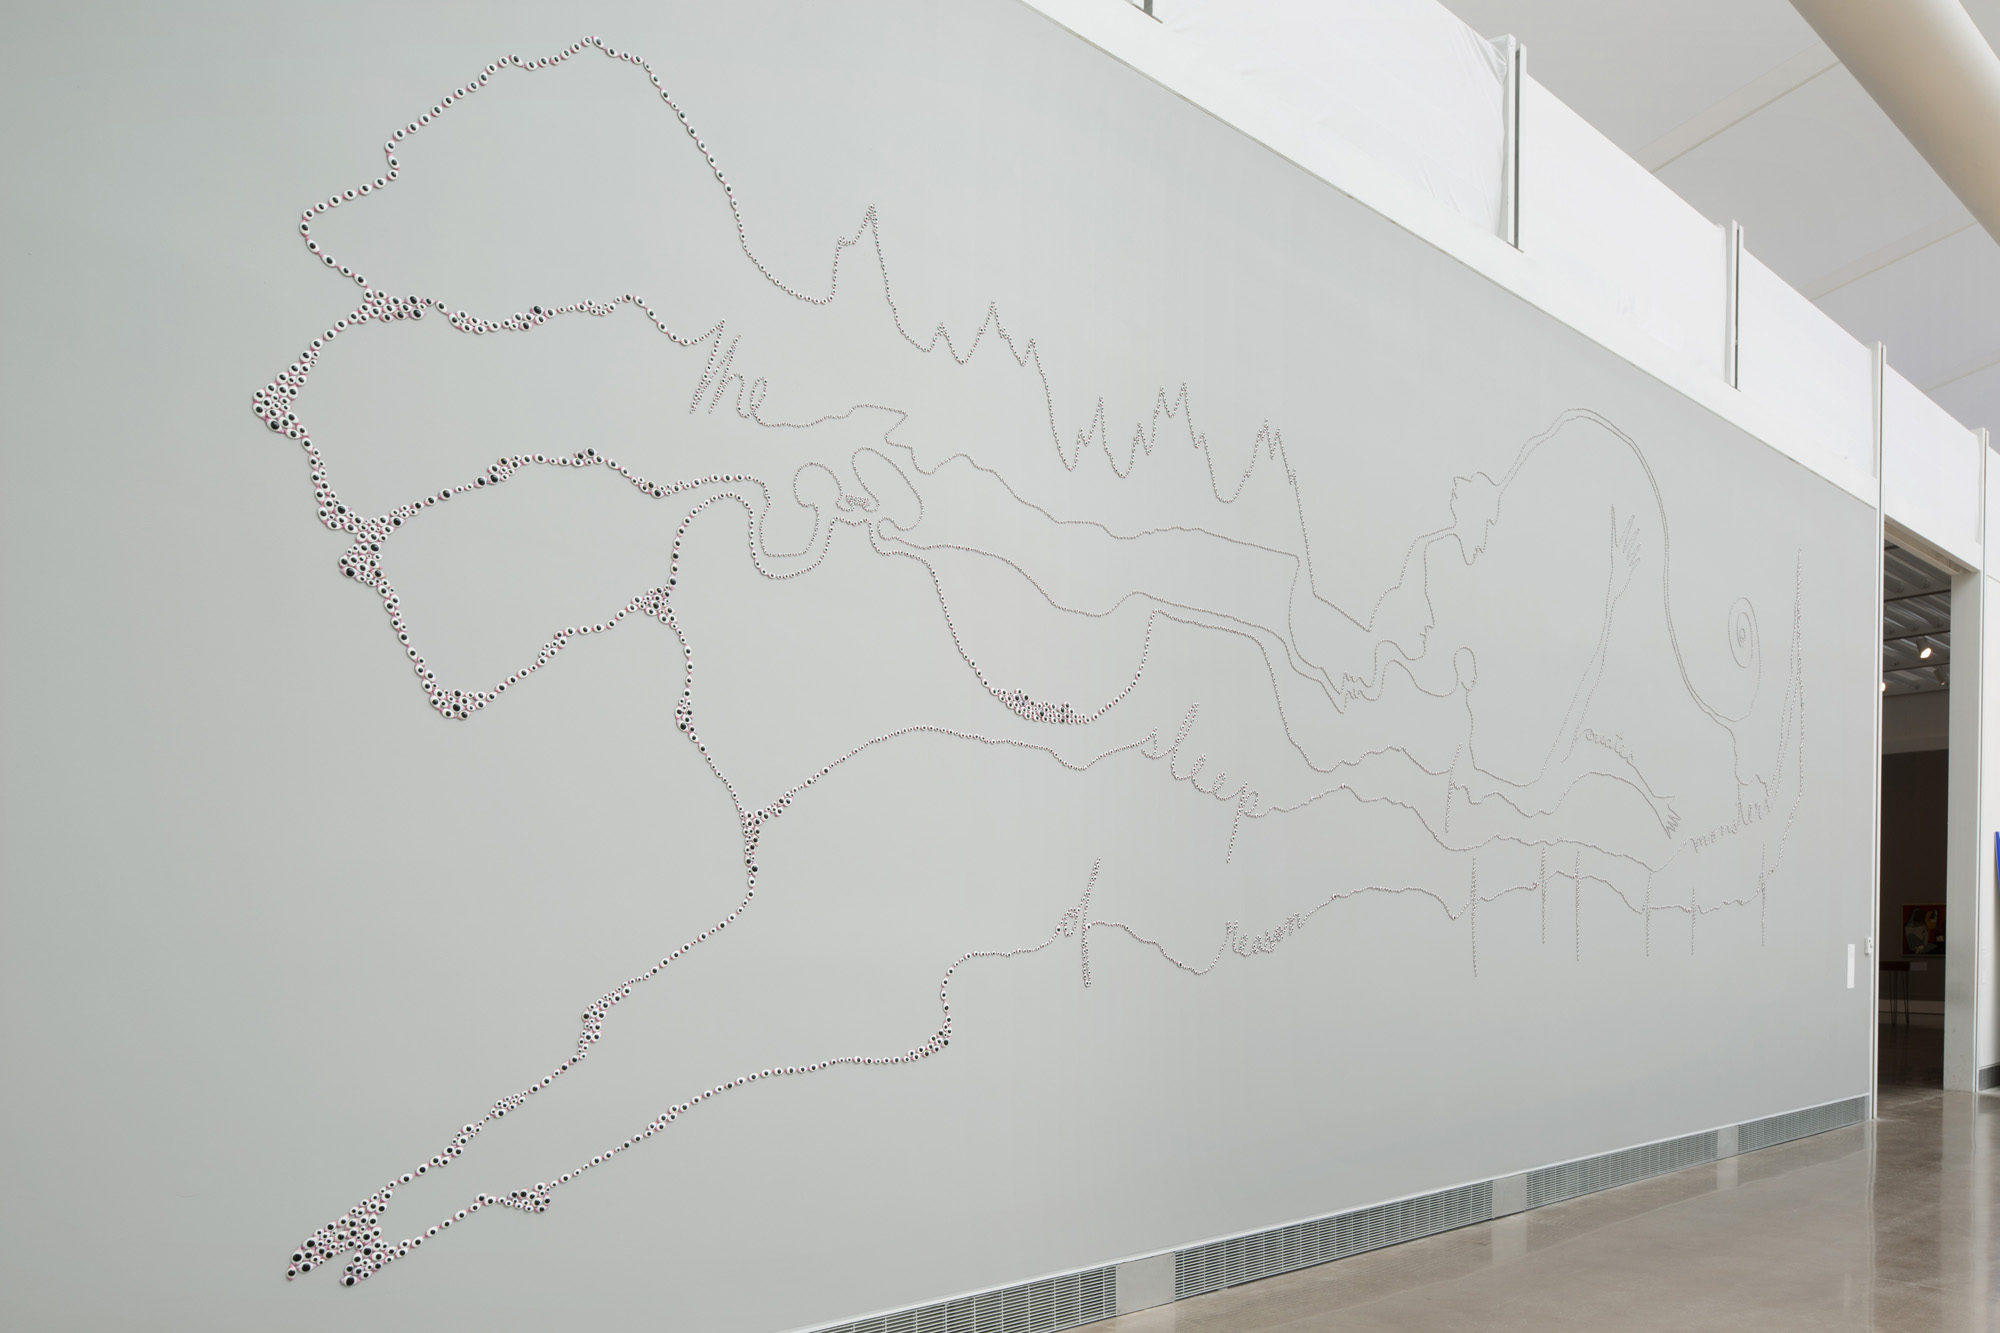 A white exhibition wall with an illustration of an abstract landscape made completely out of tiny eyes. If you look closely at the line work you see the sentence “The sleep of reason creates monsters”.